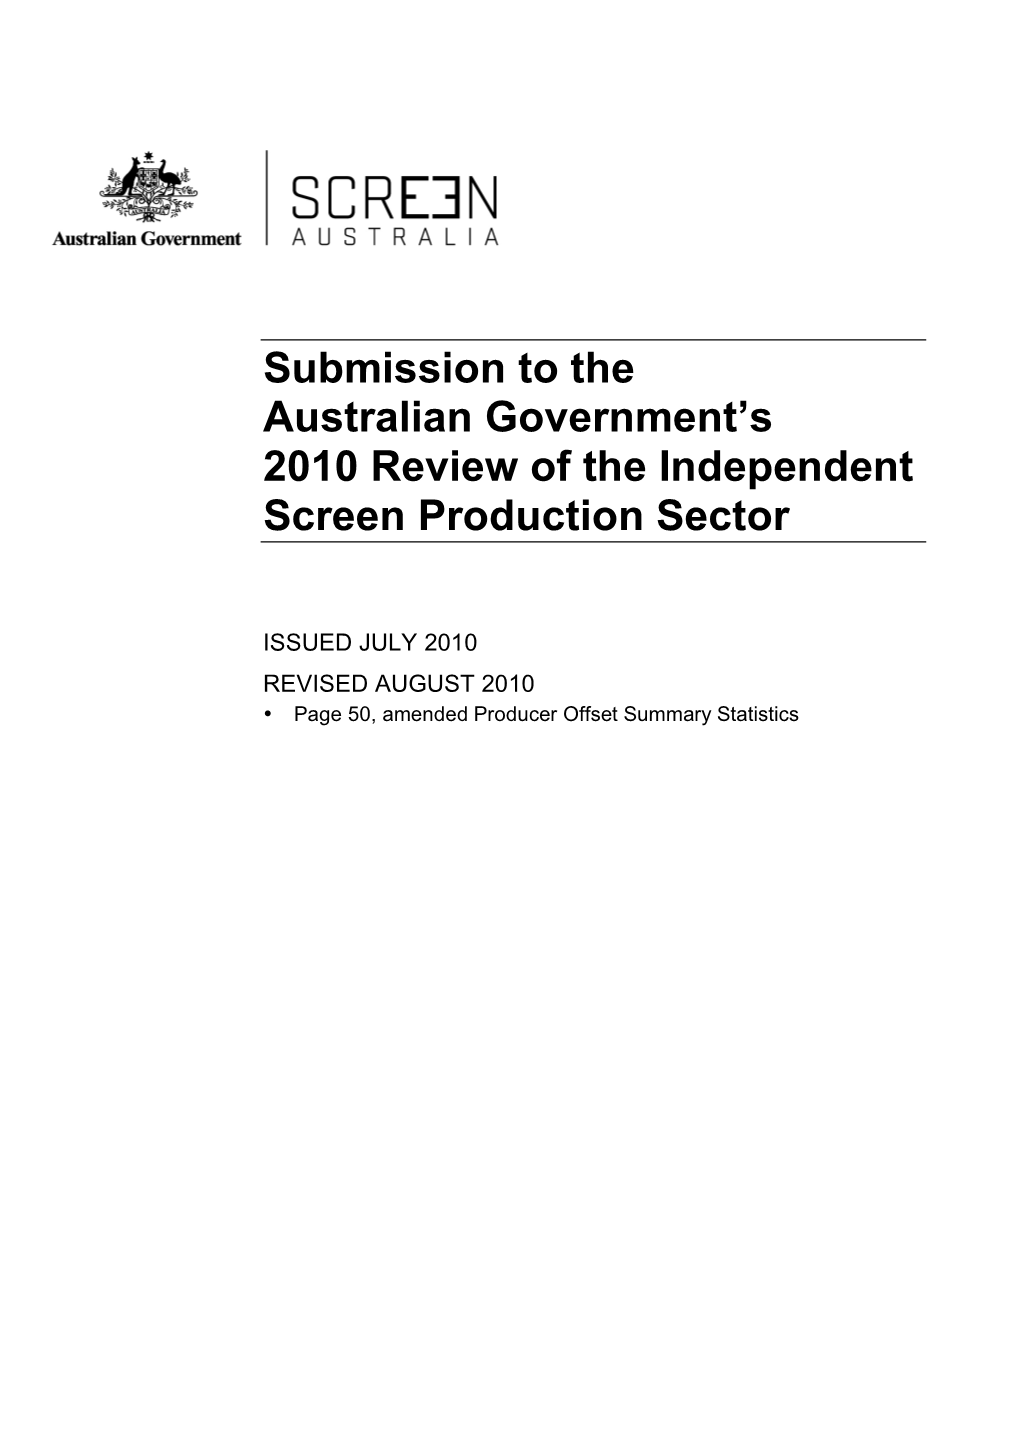 Submission to the Australian Government's 2010 Review of The